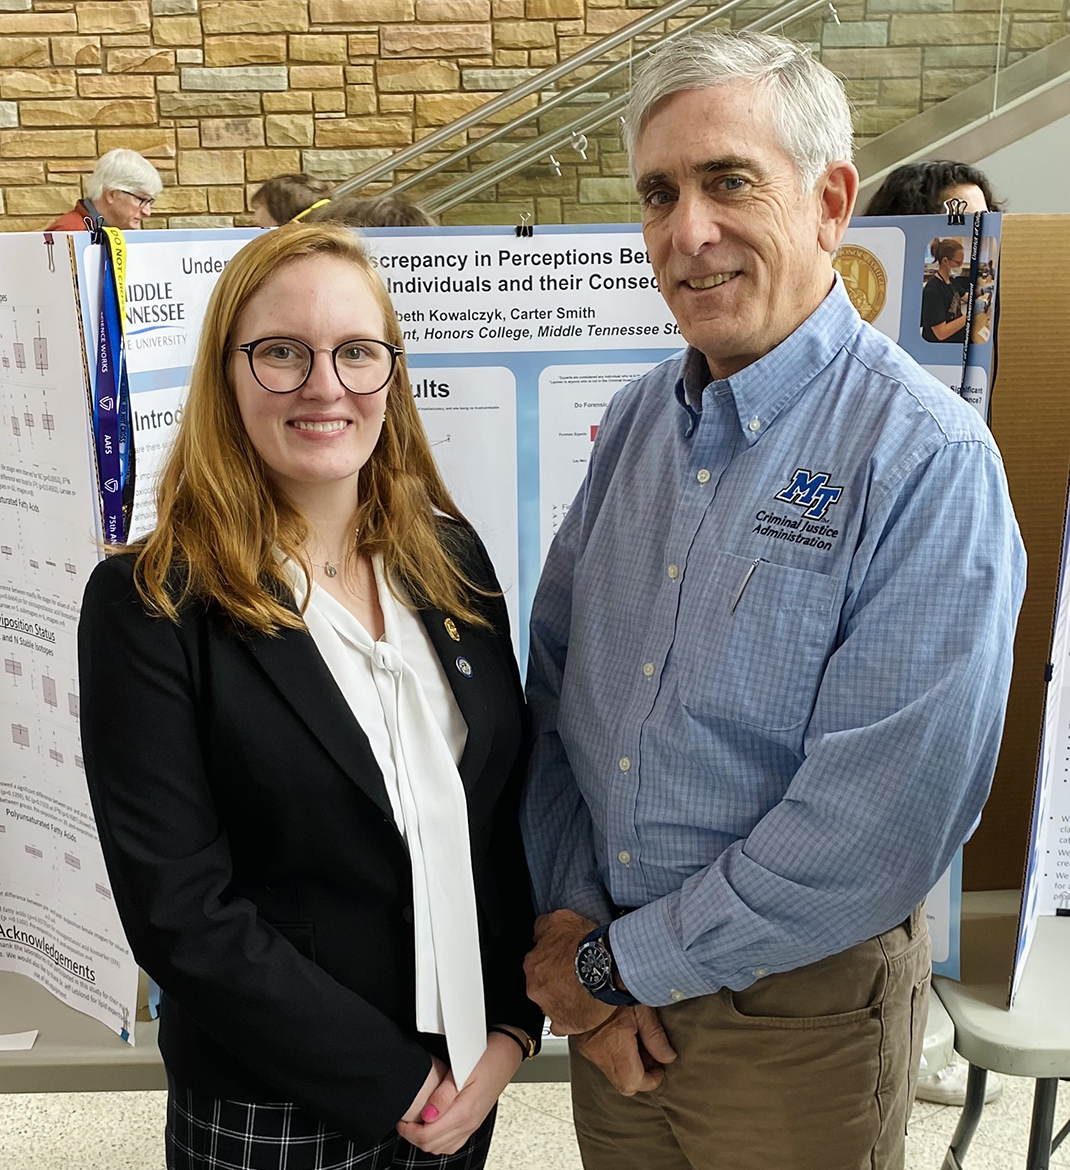 Middle Tennessee State University senior Elizabeth Kowalczyk, left, of Huntsville, Ala., and Carter Smith, assistant professor in MTSU Criminal Justice Administration attend the College of Basic and Applied Sciences’ Scholars Day as part of the universitywide Scholars Week in March in the Science Building’s Liz and Creighton Rhea Atrium. Smith was Kowalczyk’s adviser on her award-winning poster titled “Understanding the Discrepancy in Perceptions Between Forensic Experts and Lay Individuals and their Consequences.” (Photo by Allison Kowalczyk)